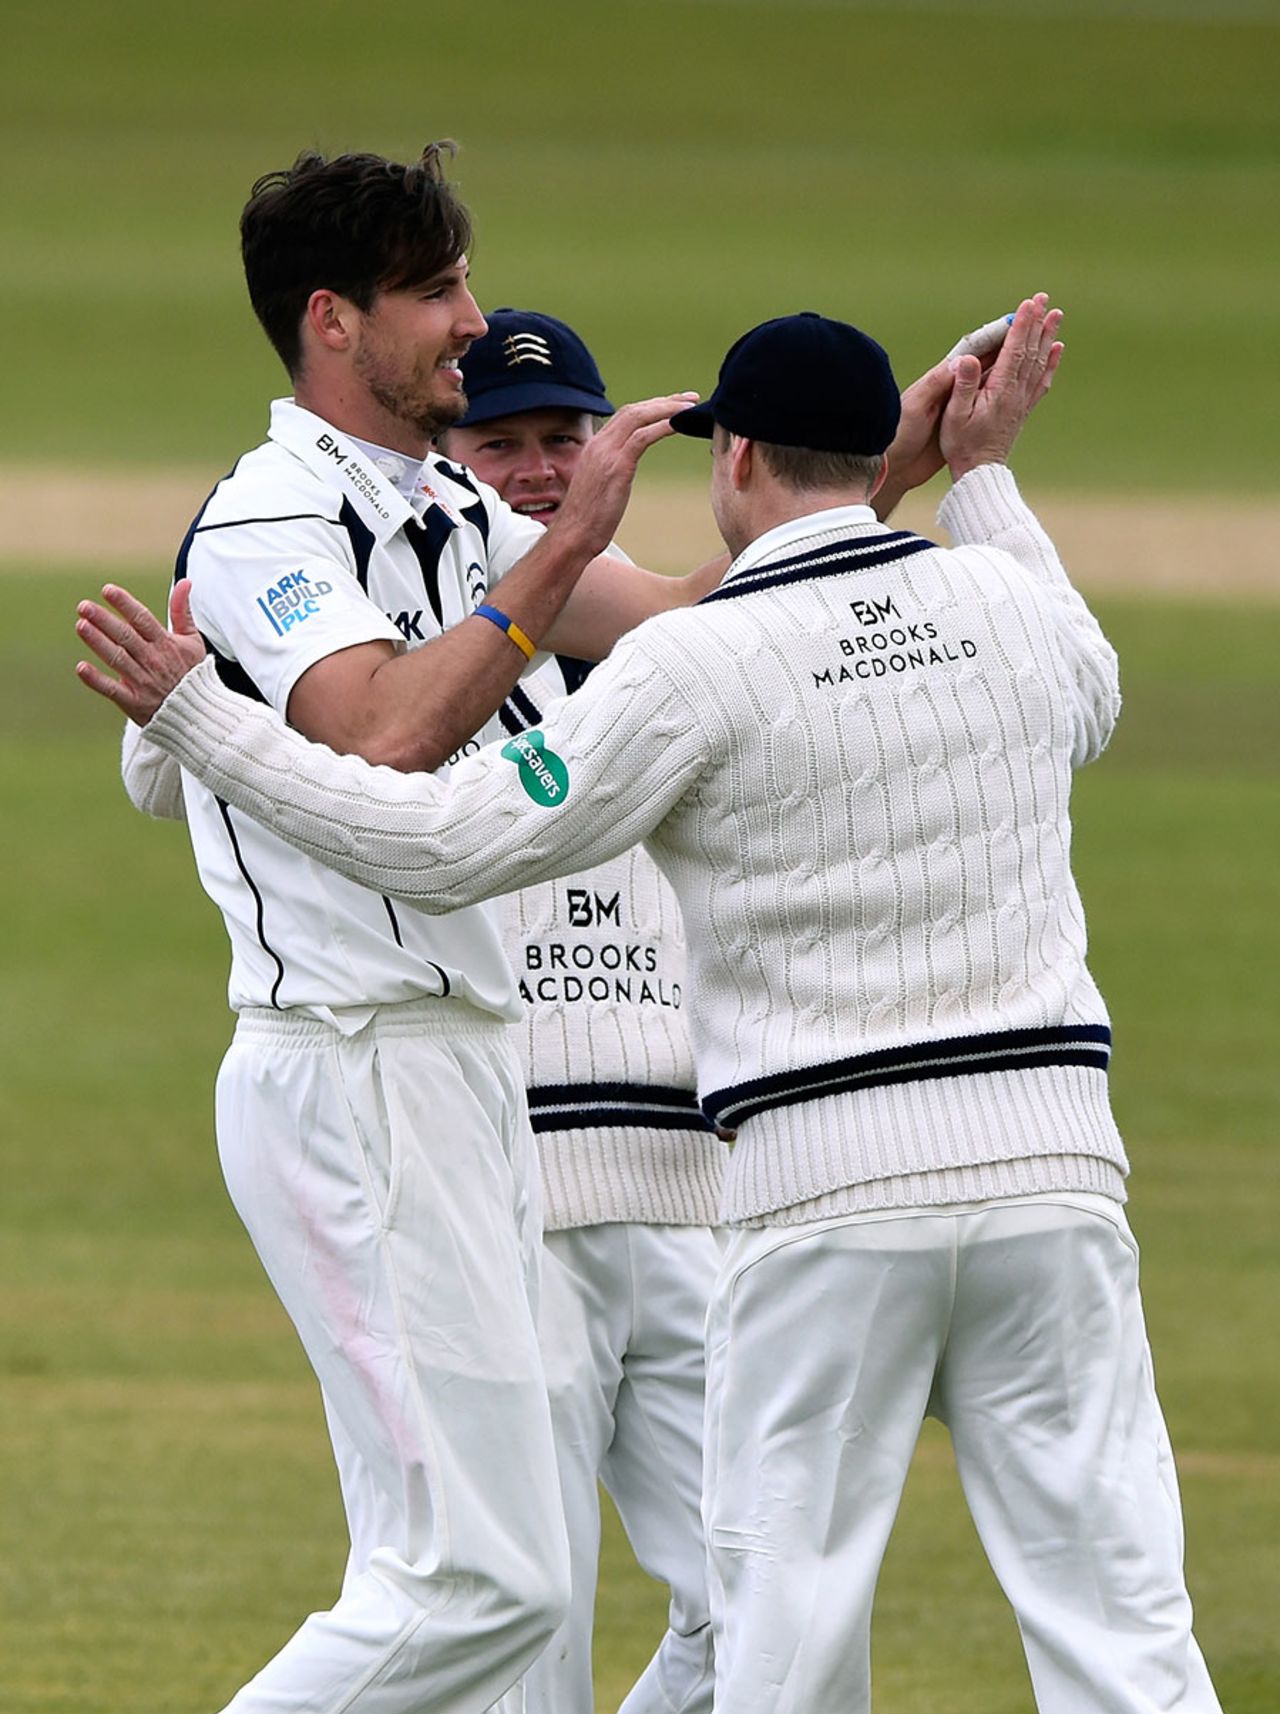 Steven Finn is congratulated after claiming the wicket of Keaton Jennings, Durham v Middlesex, County Championship, Division One, Chester-le-Street, 2nd day, April 25, 2015